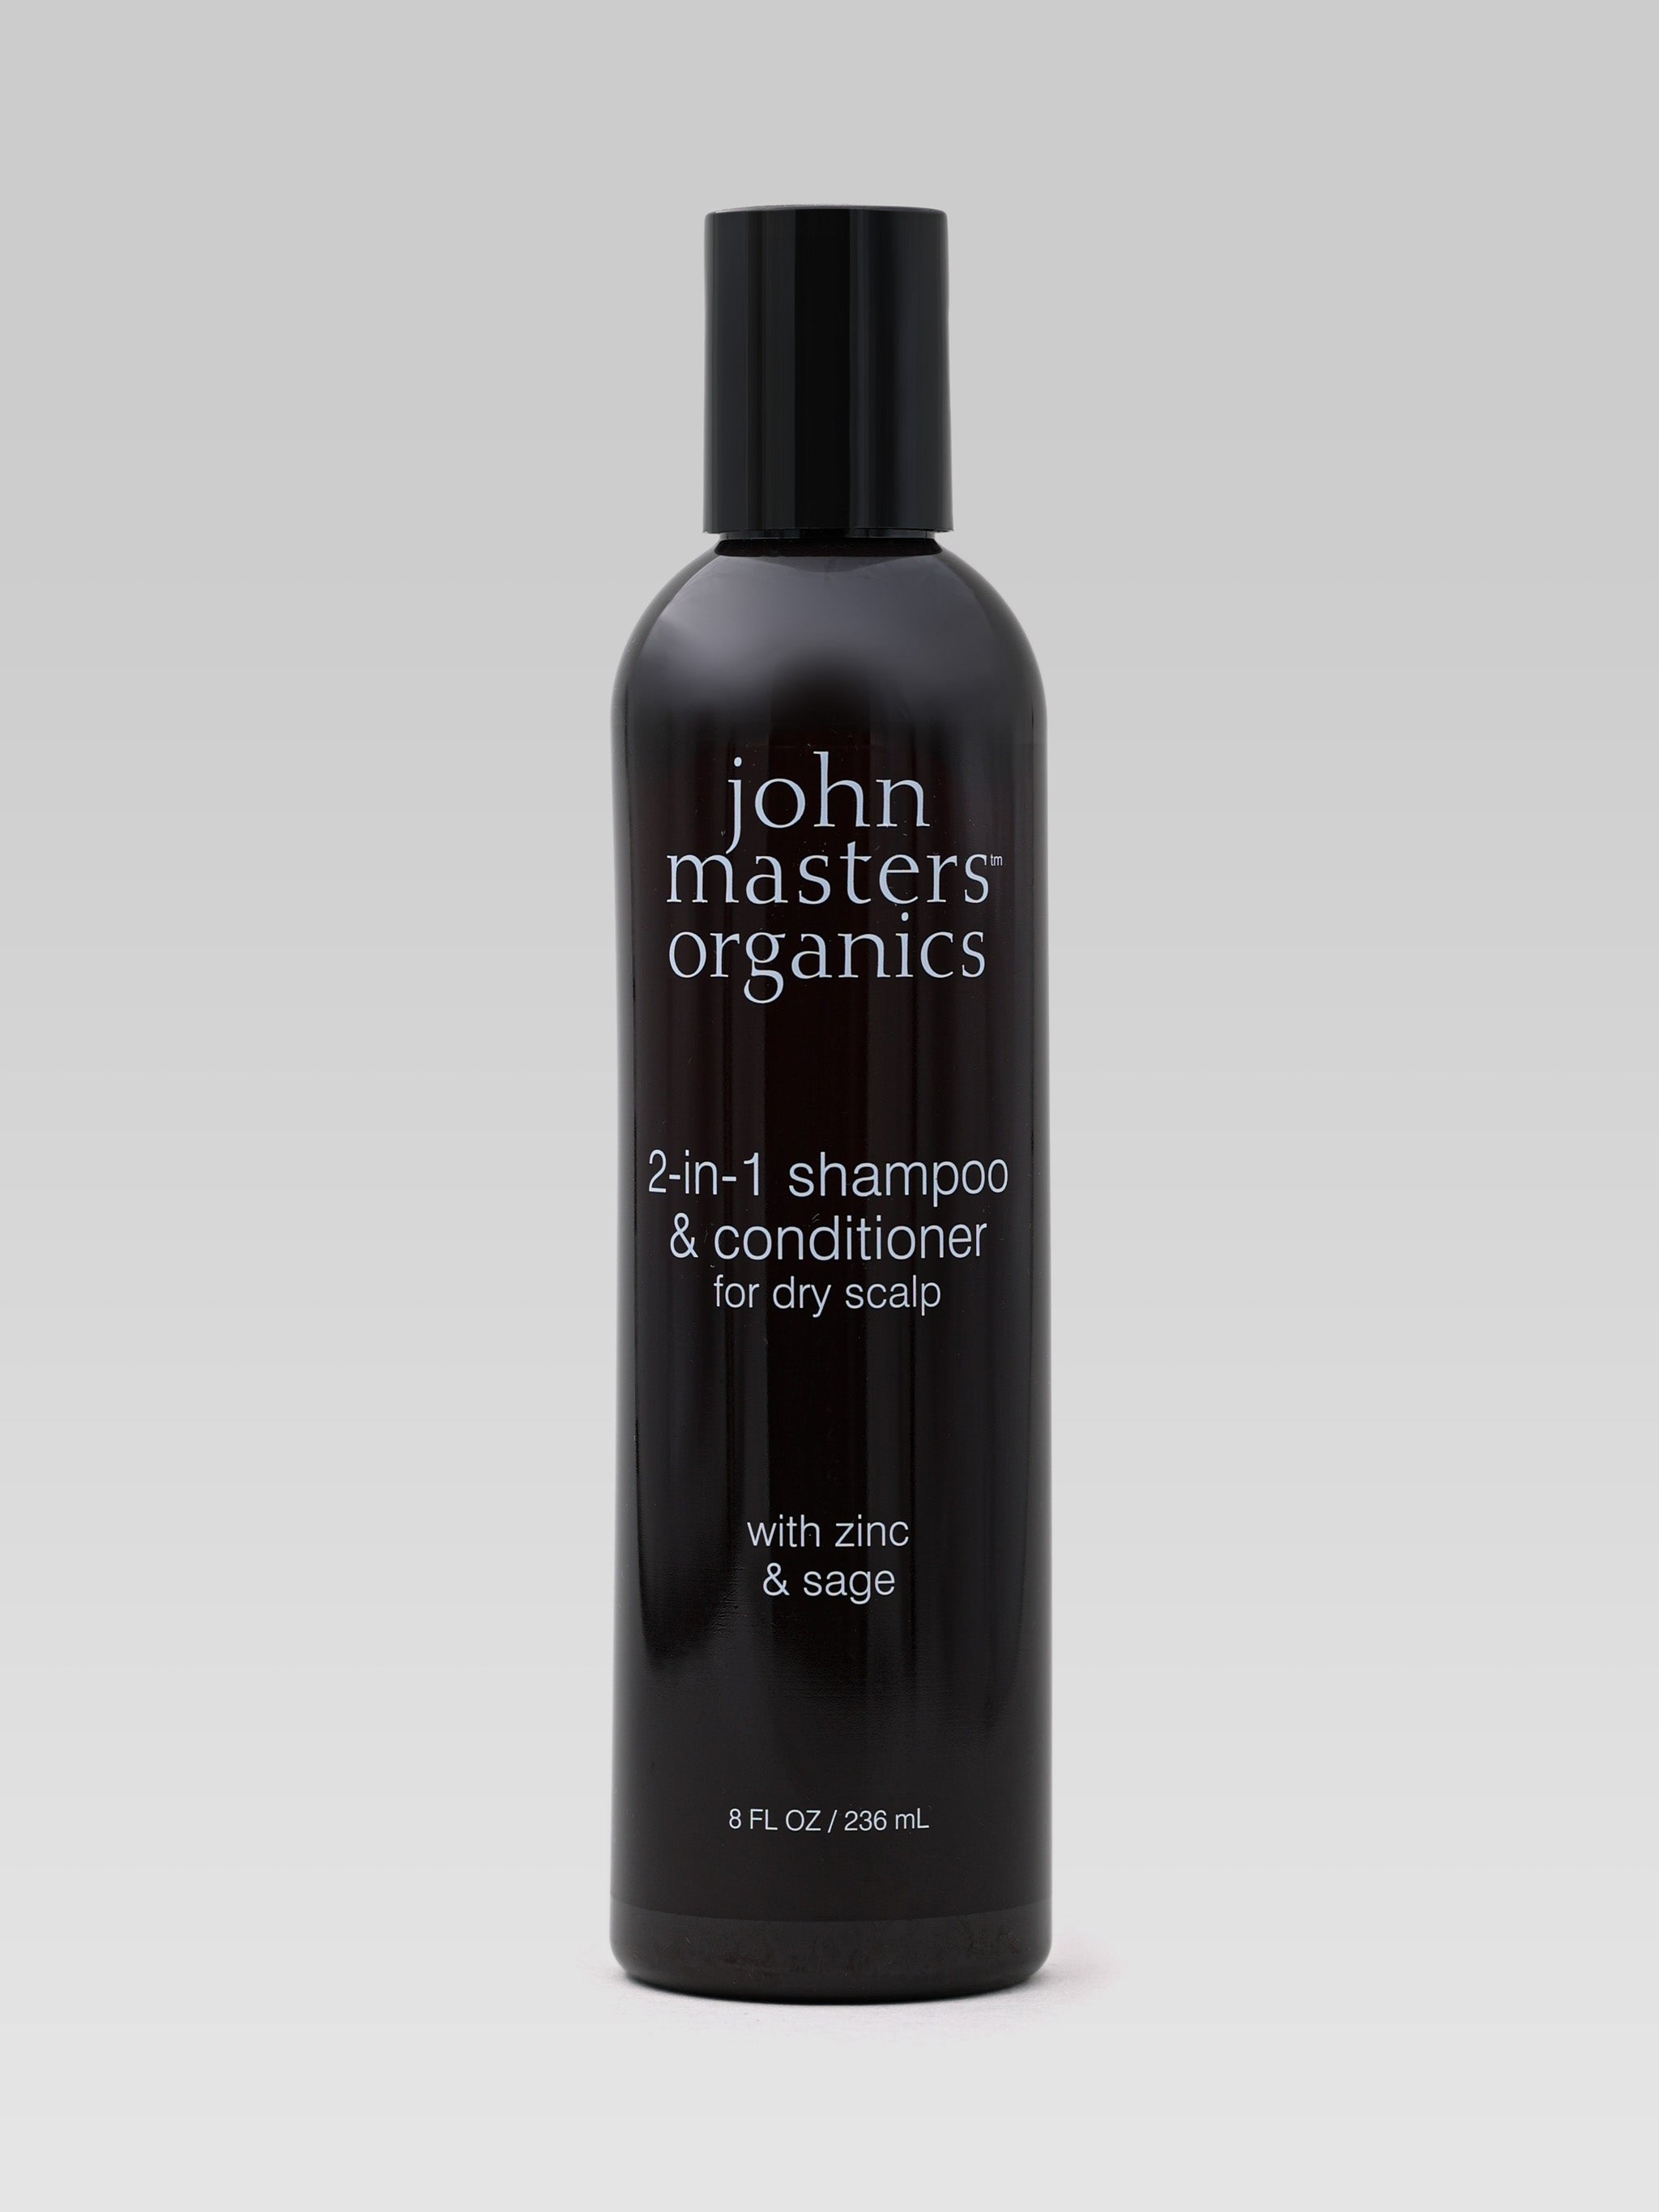 JOHN MASTERS ORGANICS 2-in-1 Shampoo and Conditioner with Zinc and Sage